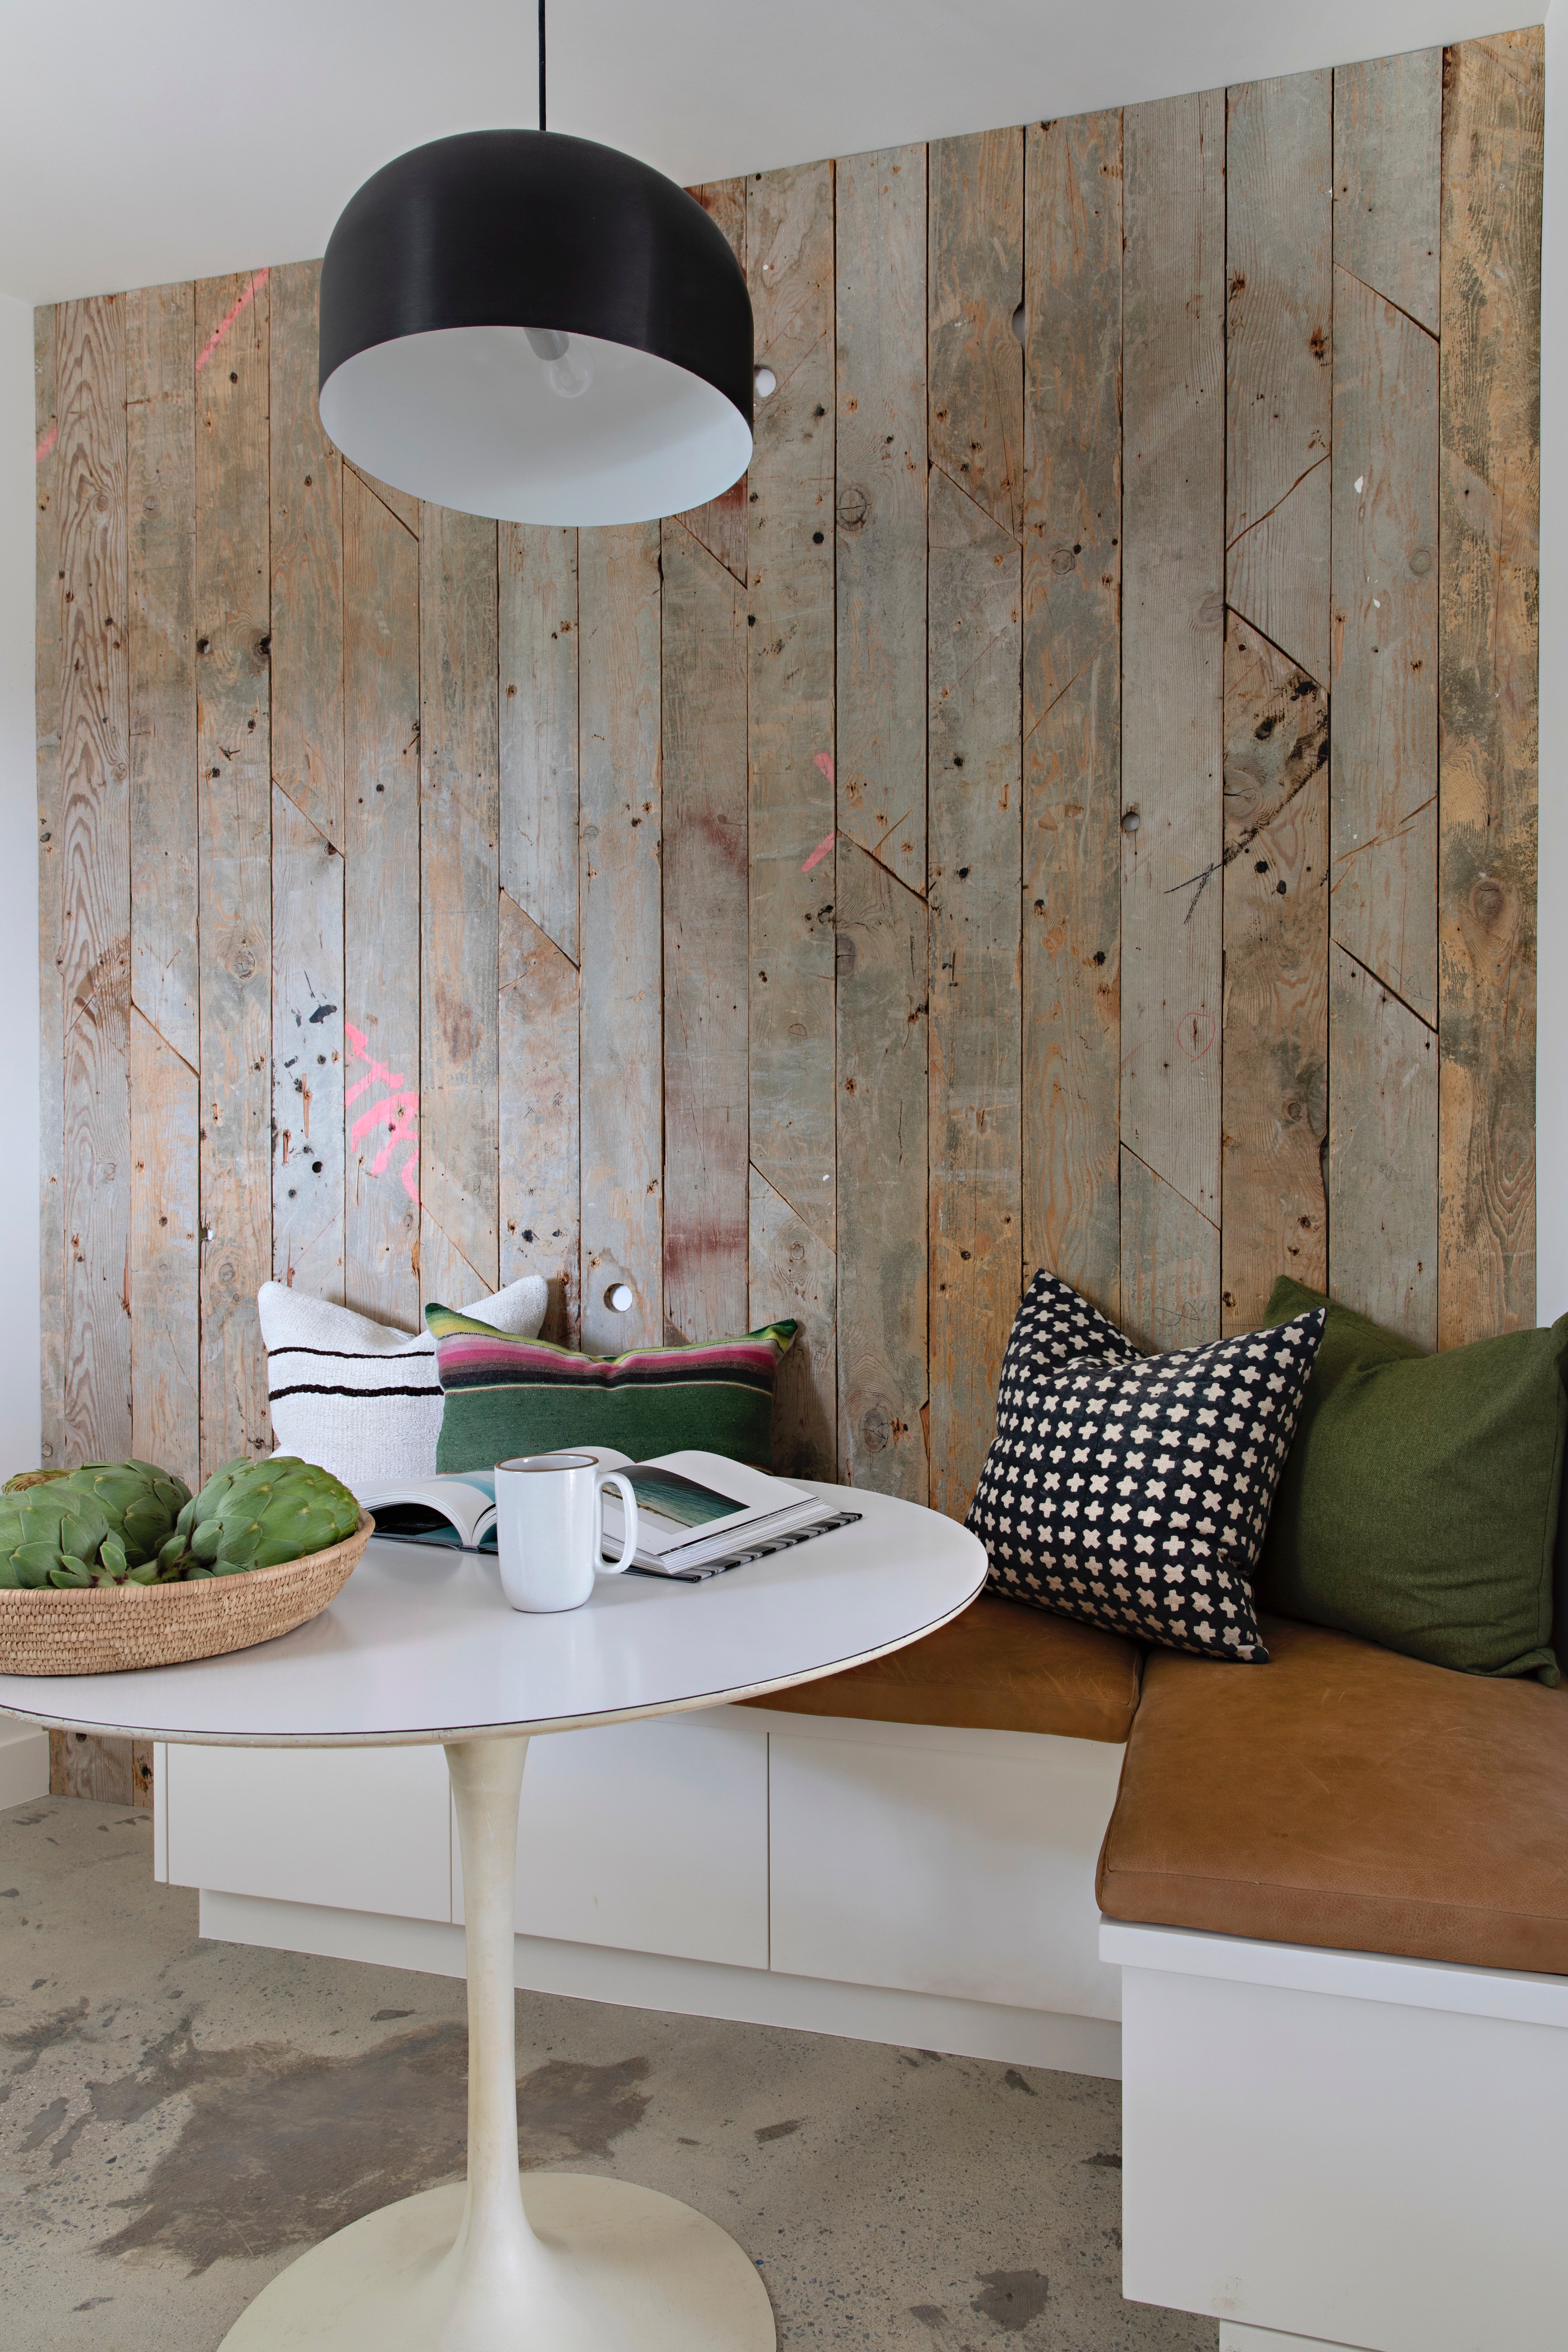 breakfast nook with salvaged wood plank wall